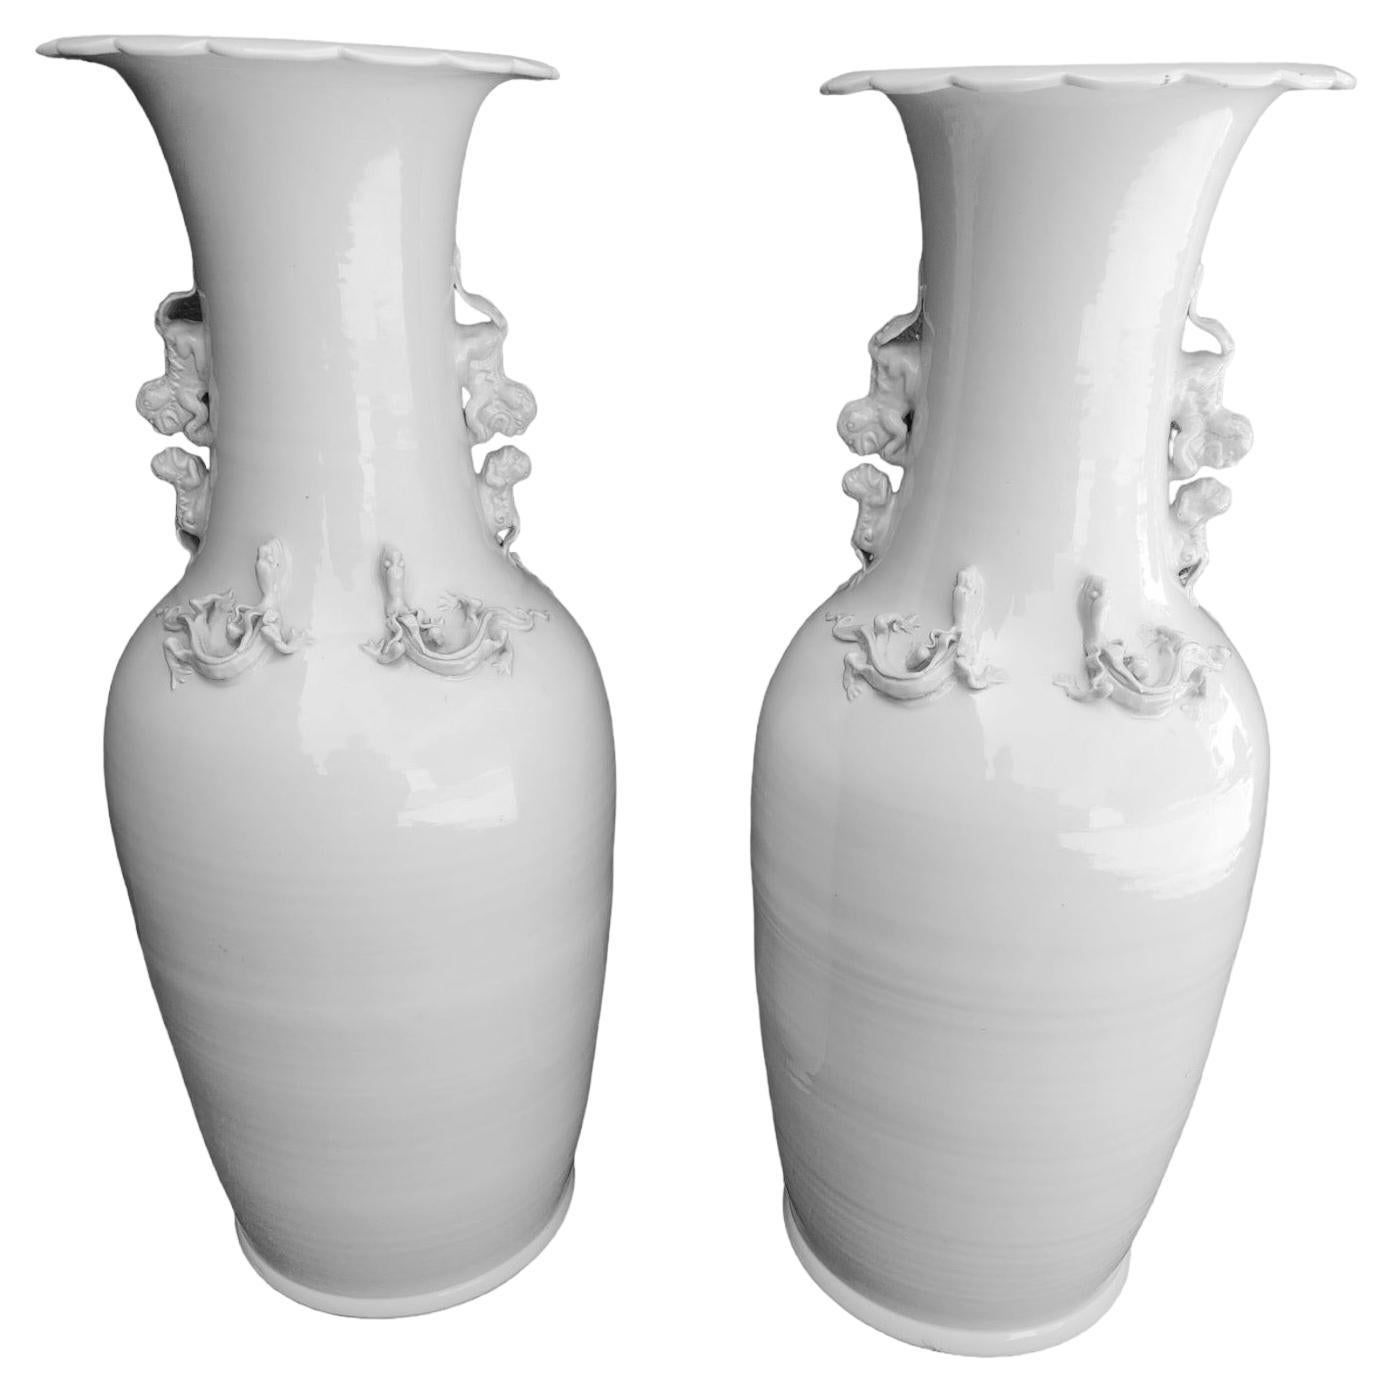 Monumental Pair of 1920s Chinese Blanc de Chine Urns